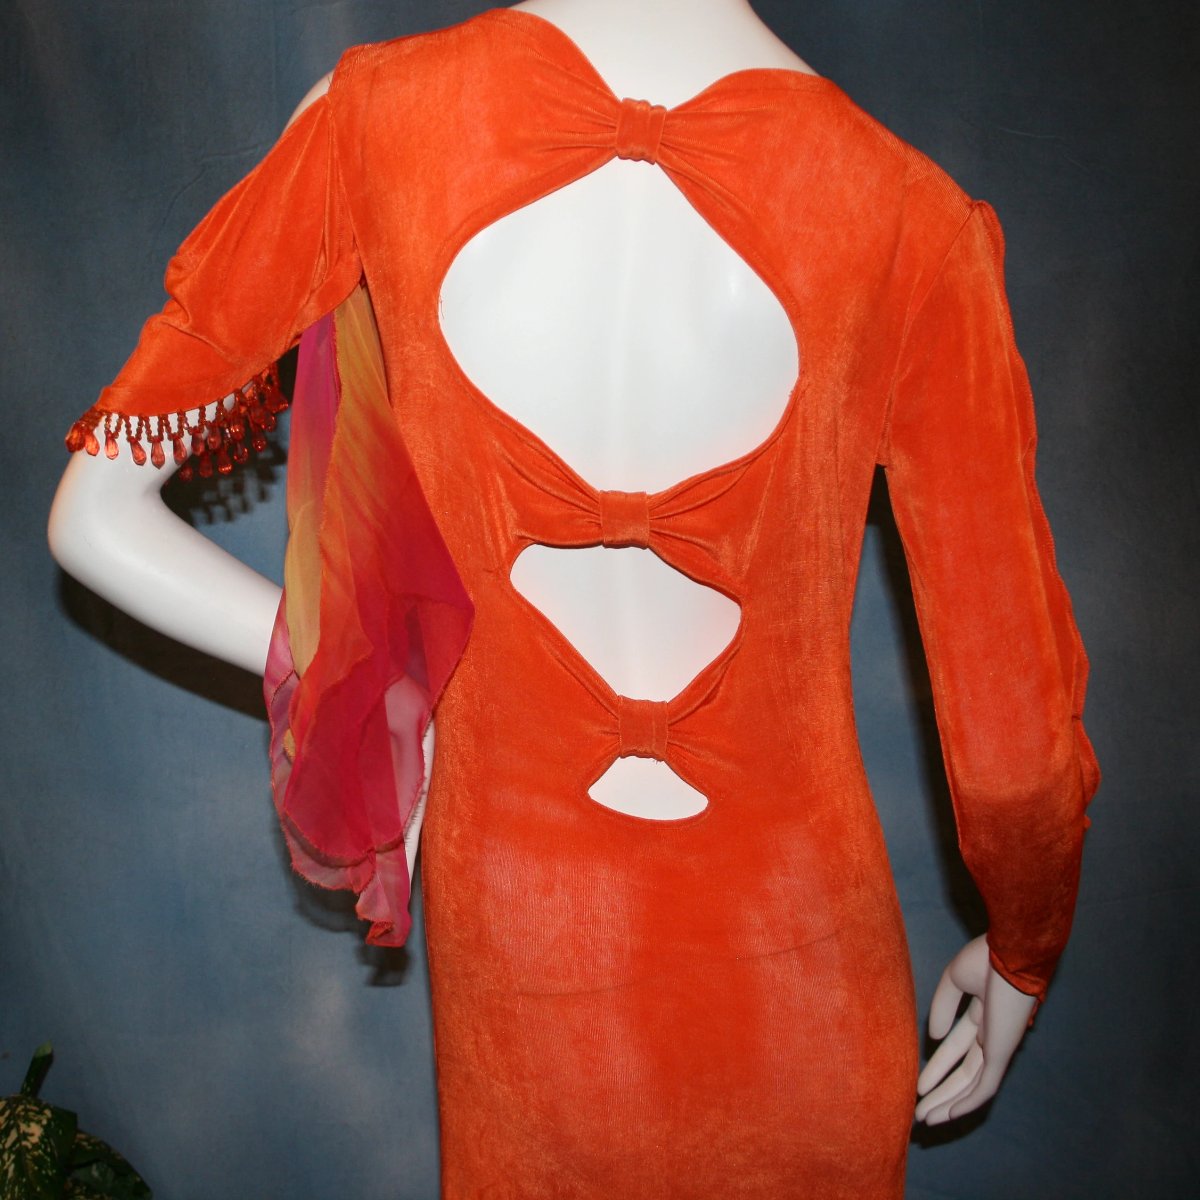 upper back close view of Orange social ballroom dress created in luxurious solid slinky fabric with chiffon insets of rainbow oranges & yellows, with hand beading on arm draping. Very full around bottom, and makes a great beginner ballroom dancer smooth dress.